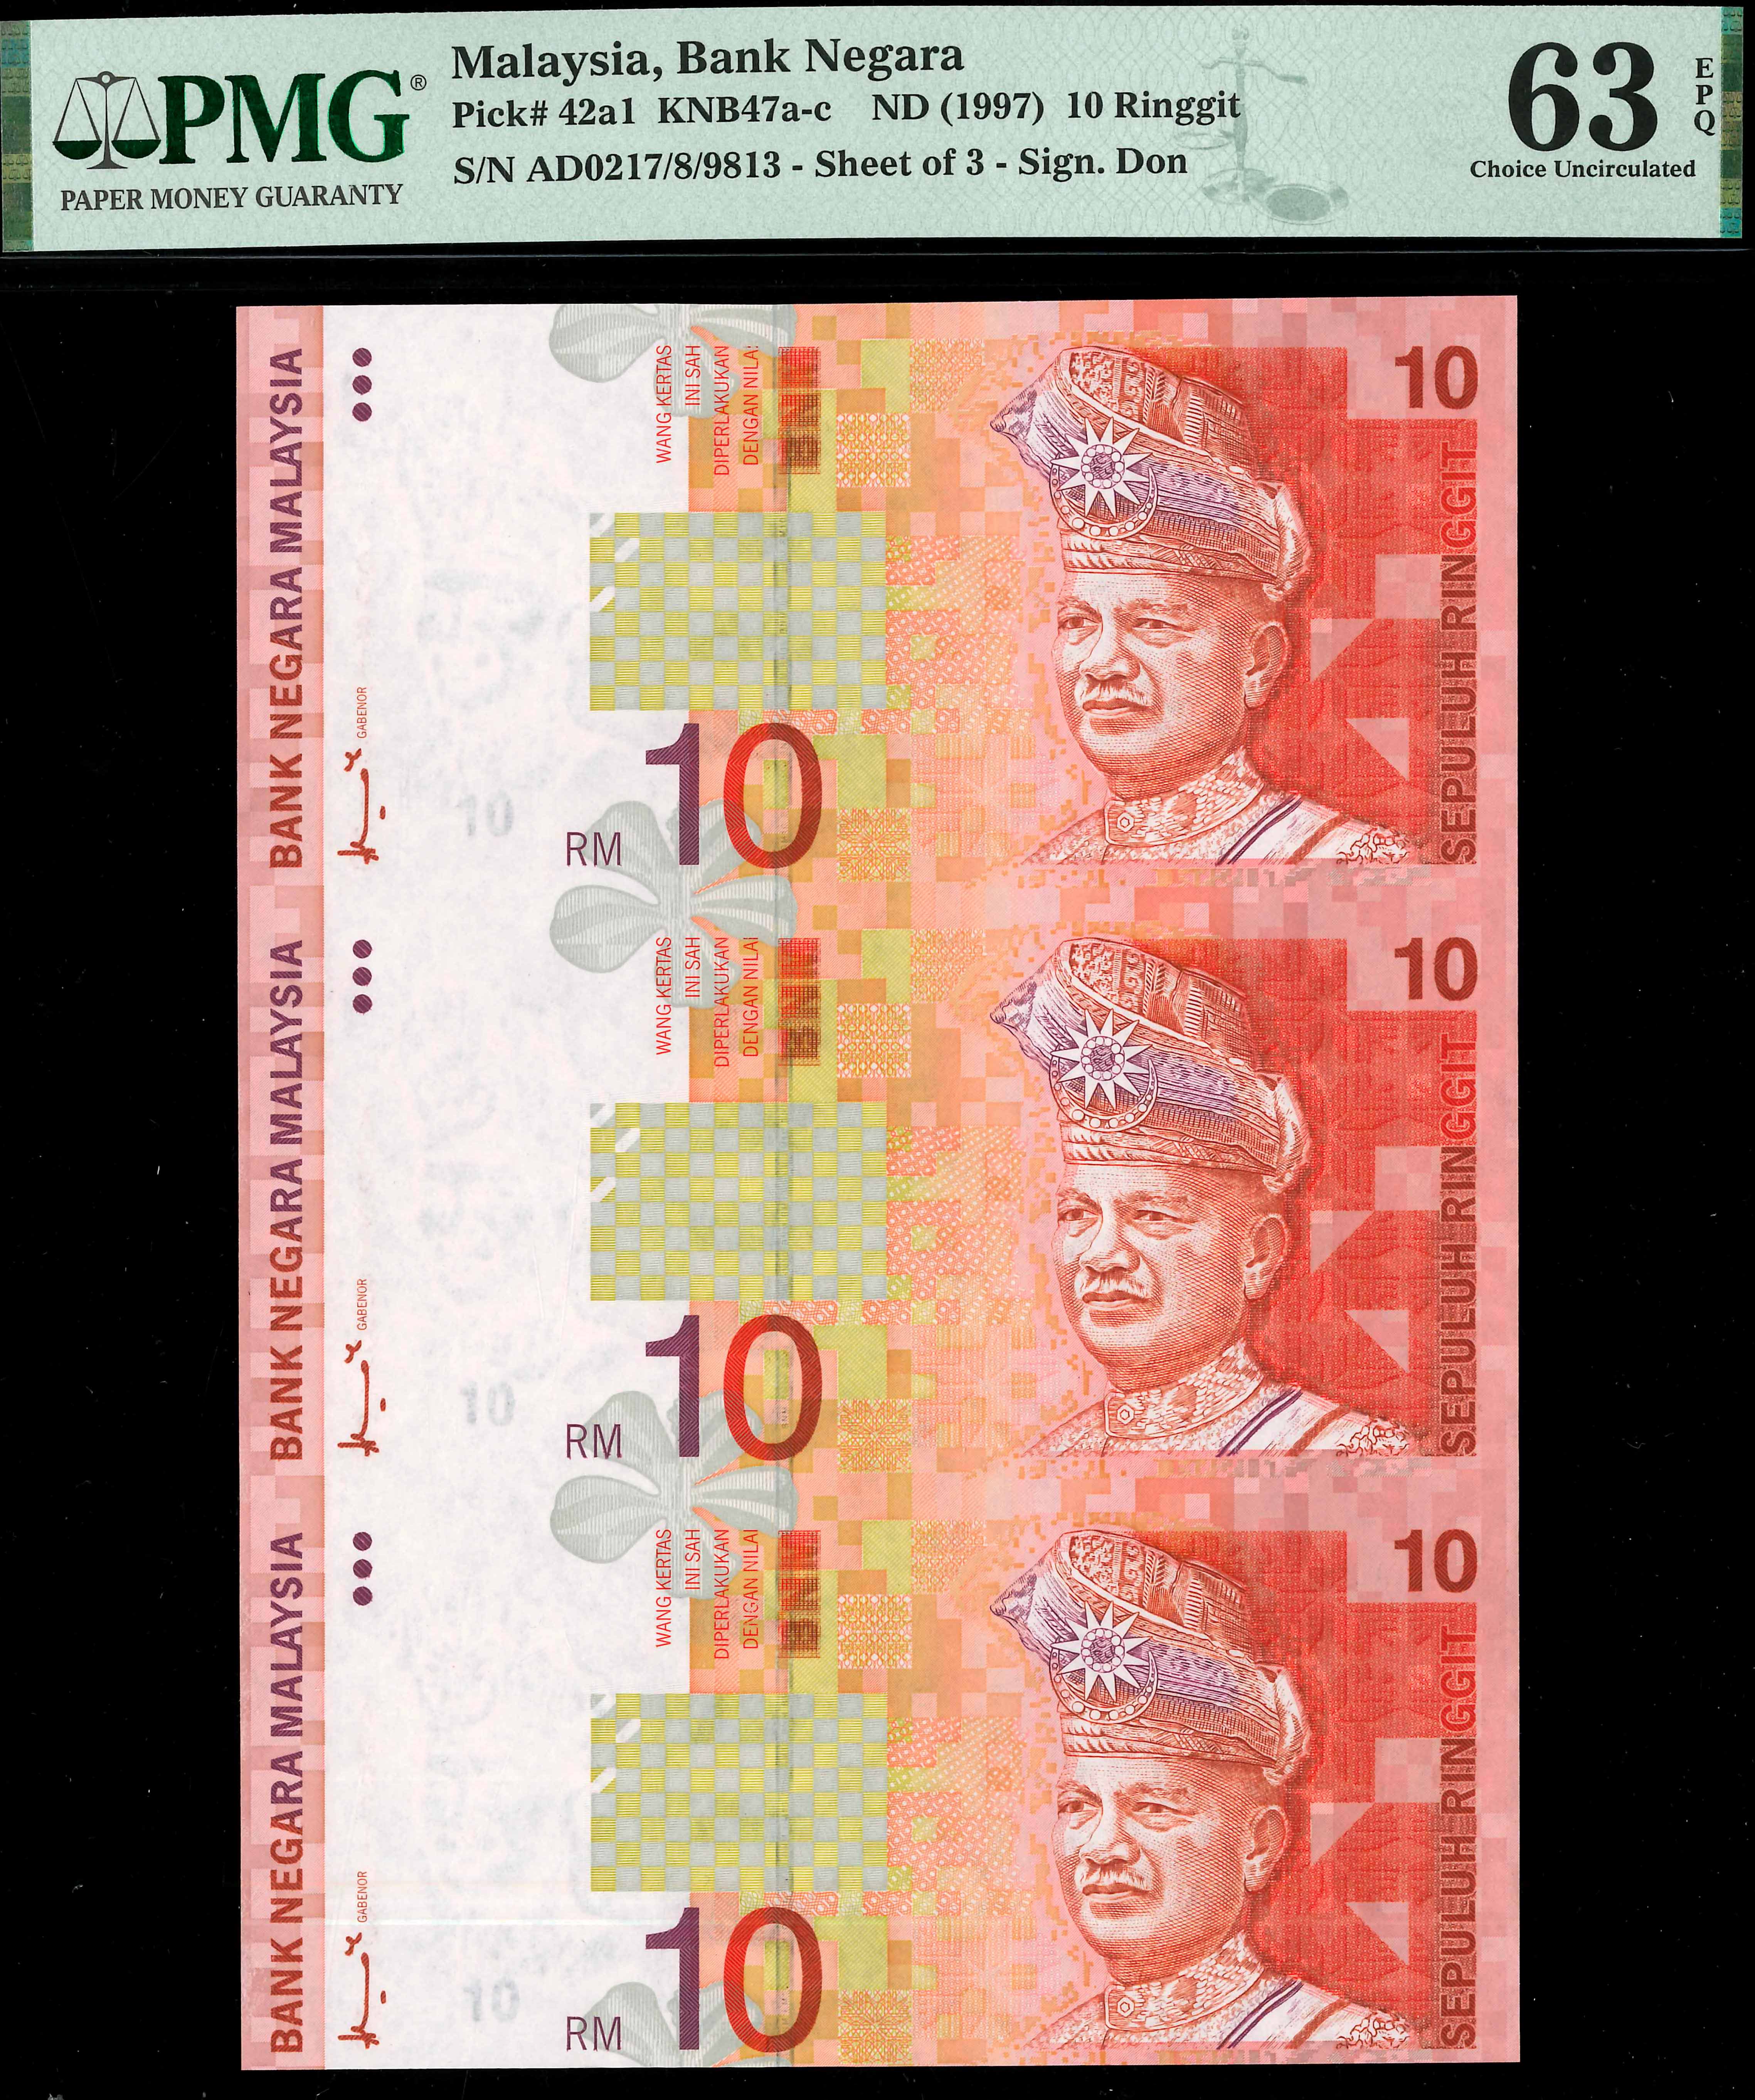 Malaysia, 8th series, 1997, 10 Ringgit, P-42a1, S/N. AD 0217/18 